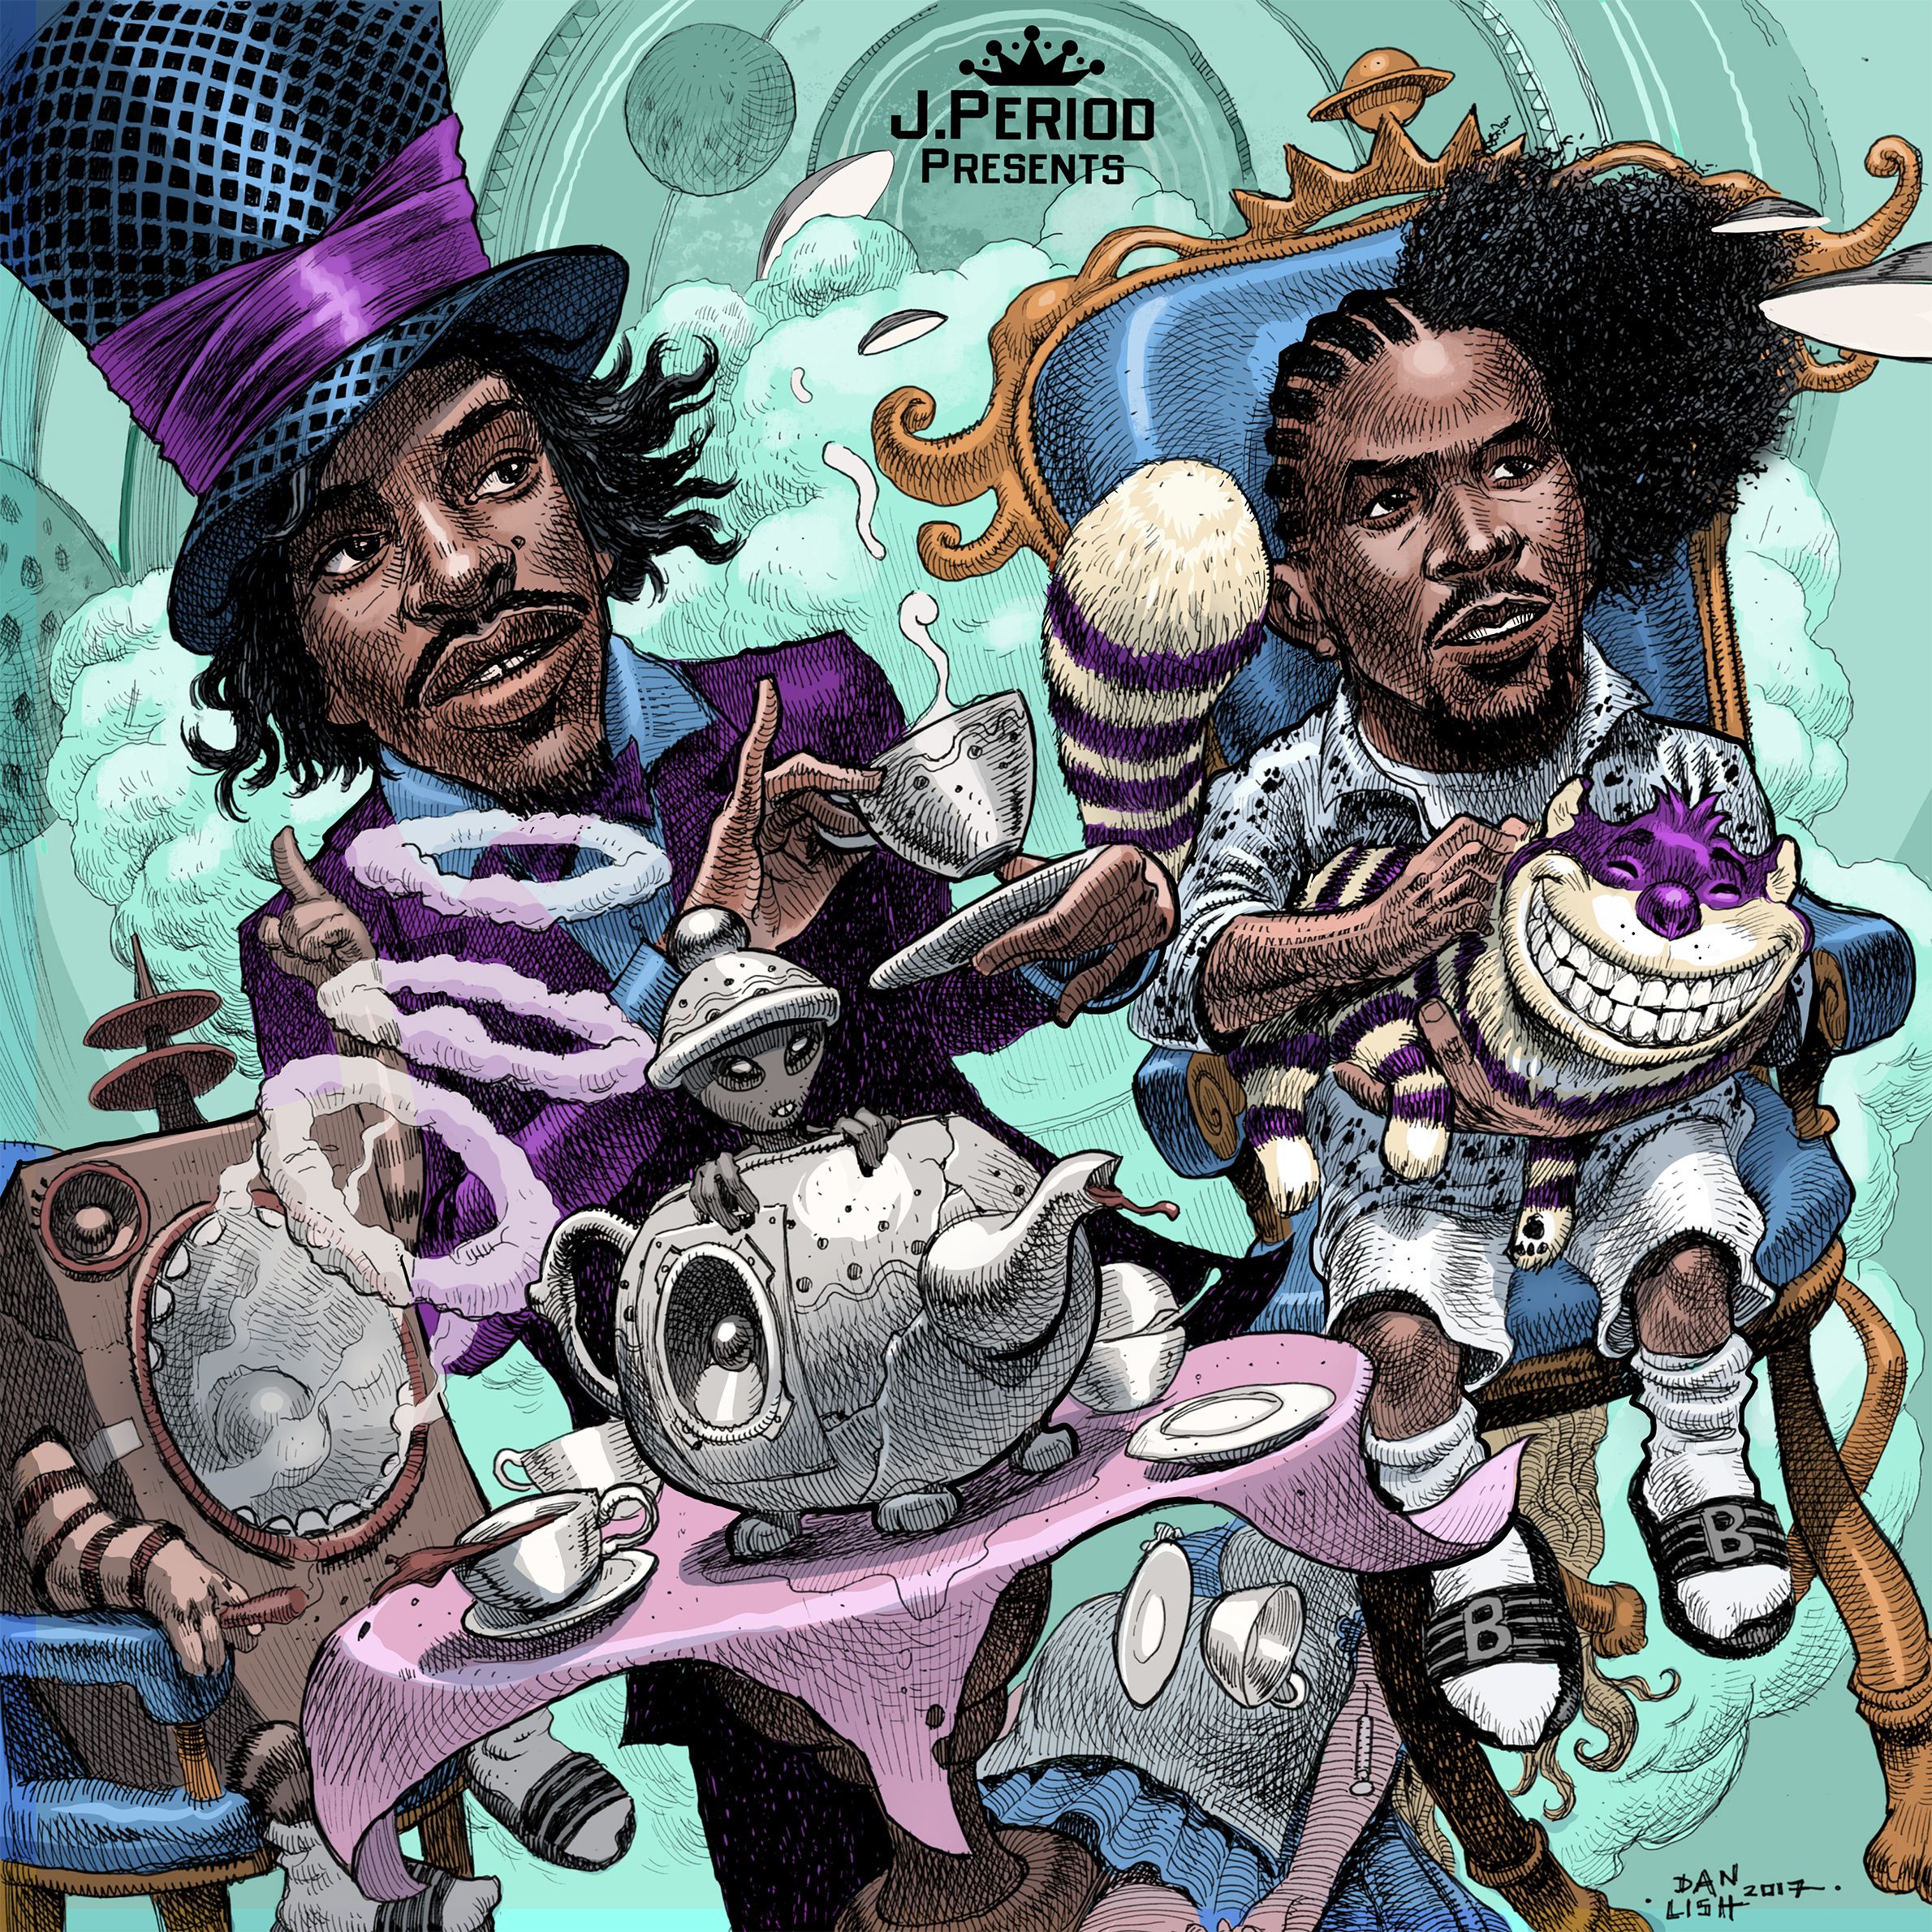 J.PERIOD Presents... OutKast: ReFixed (Recorded Live)